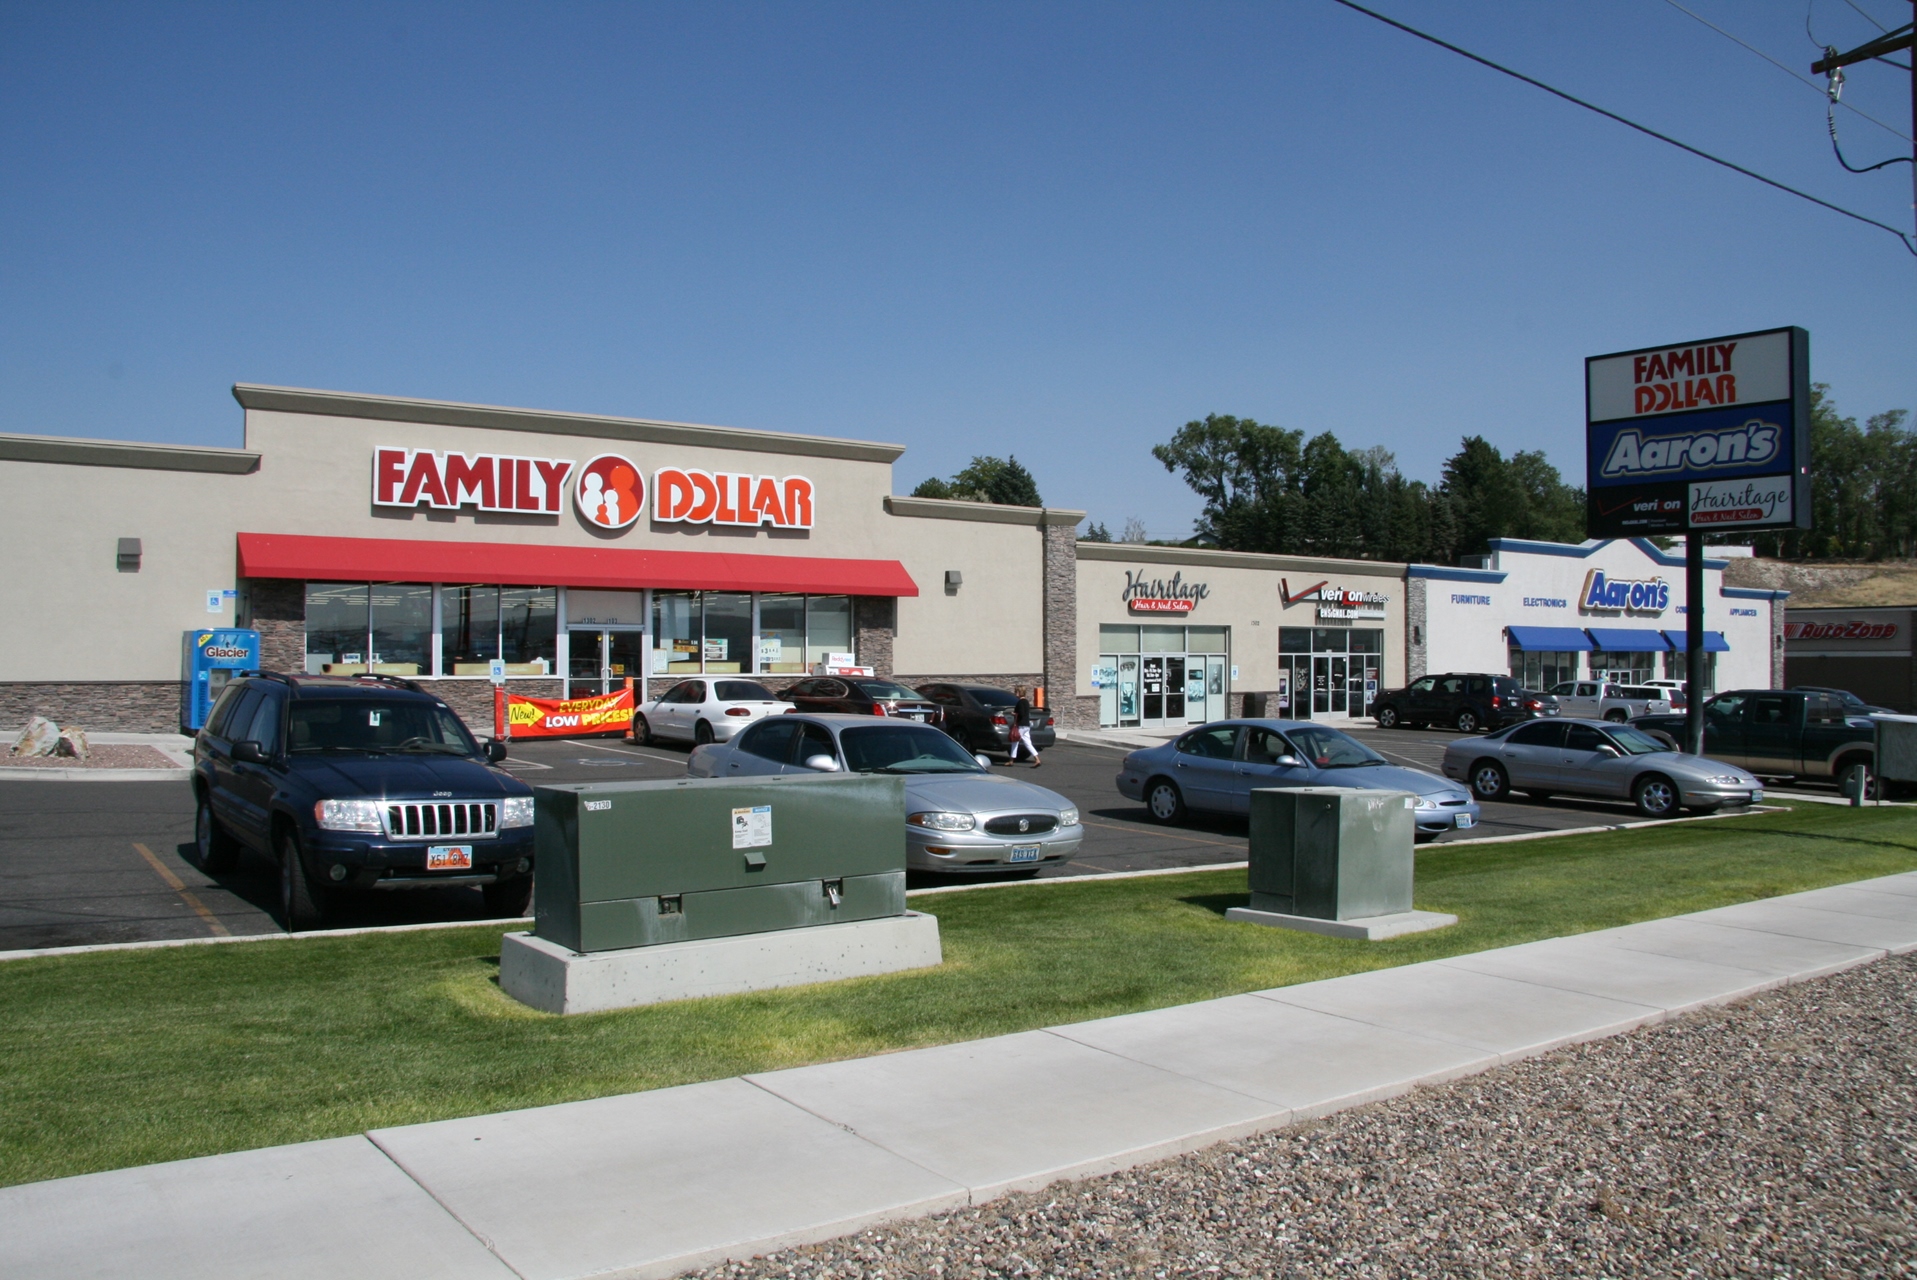 Aaron’s/Family Dollar Investment – $2,450,000.00